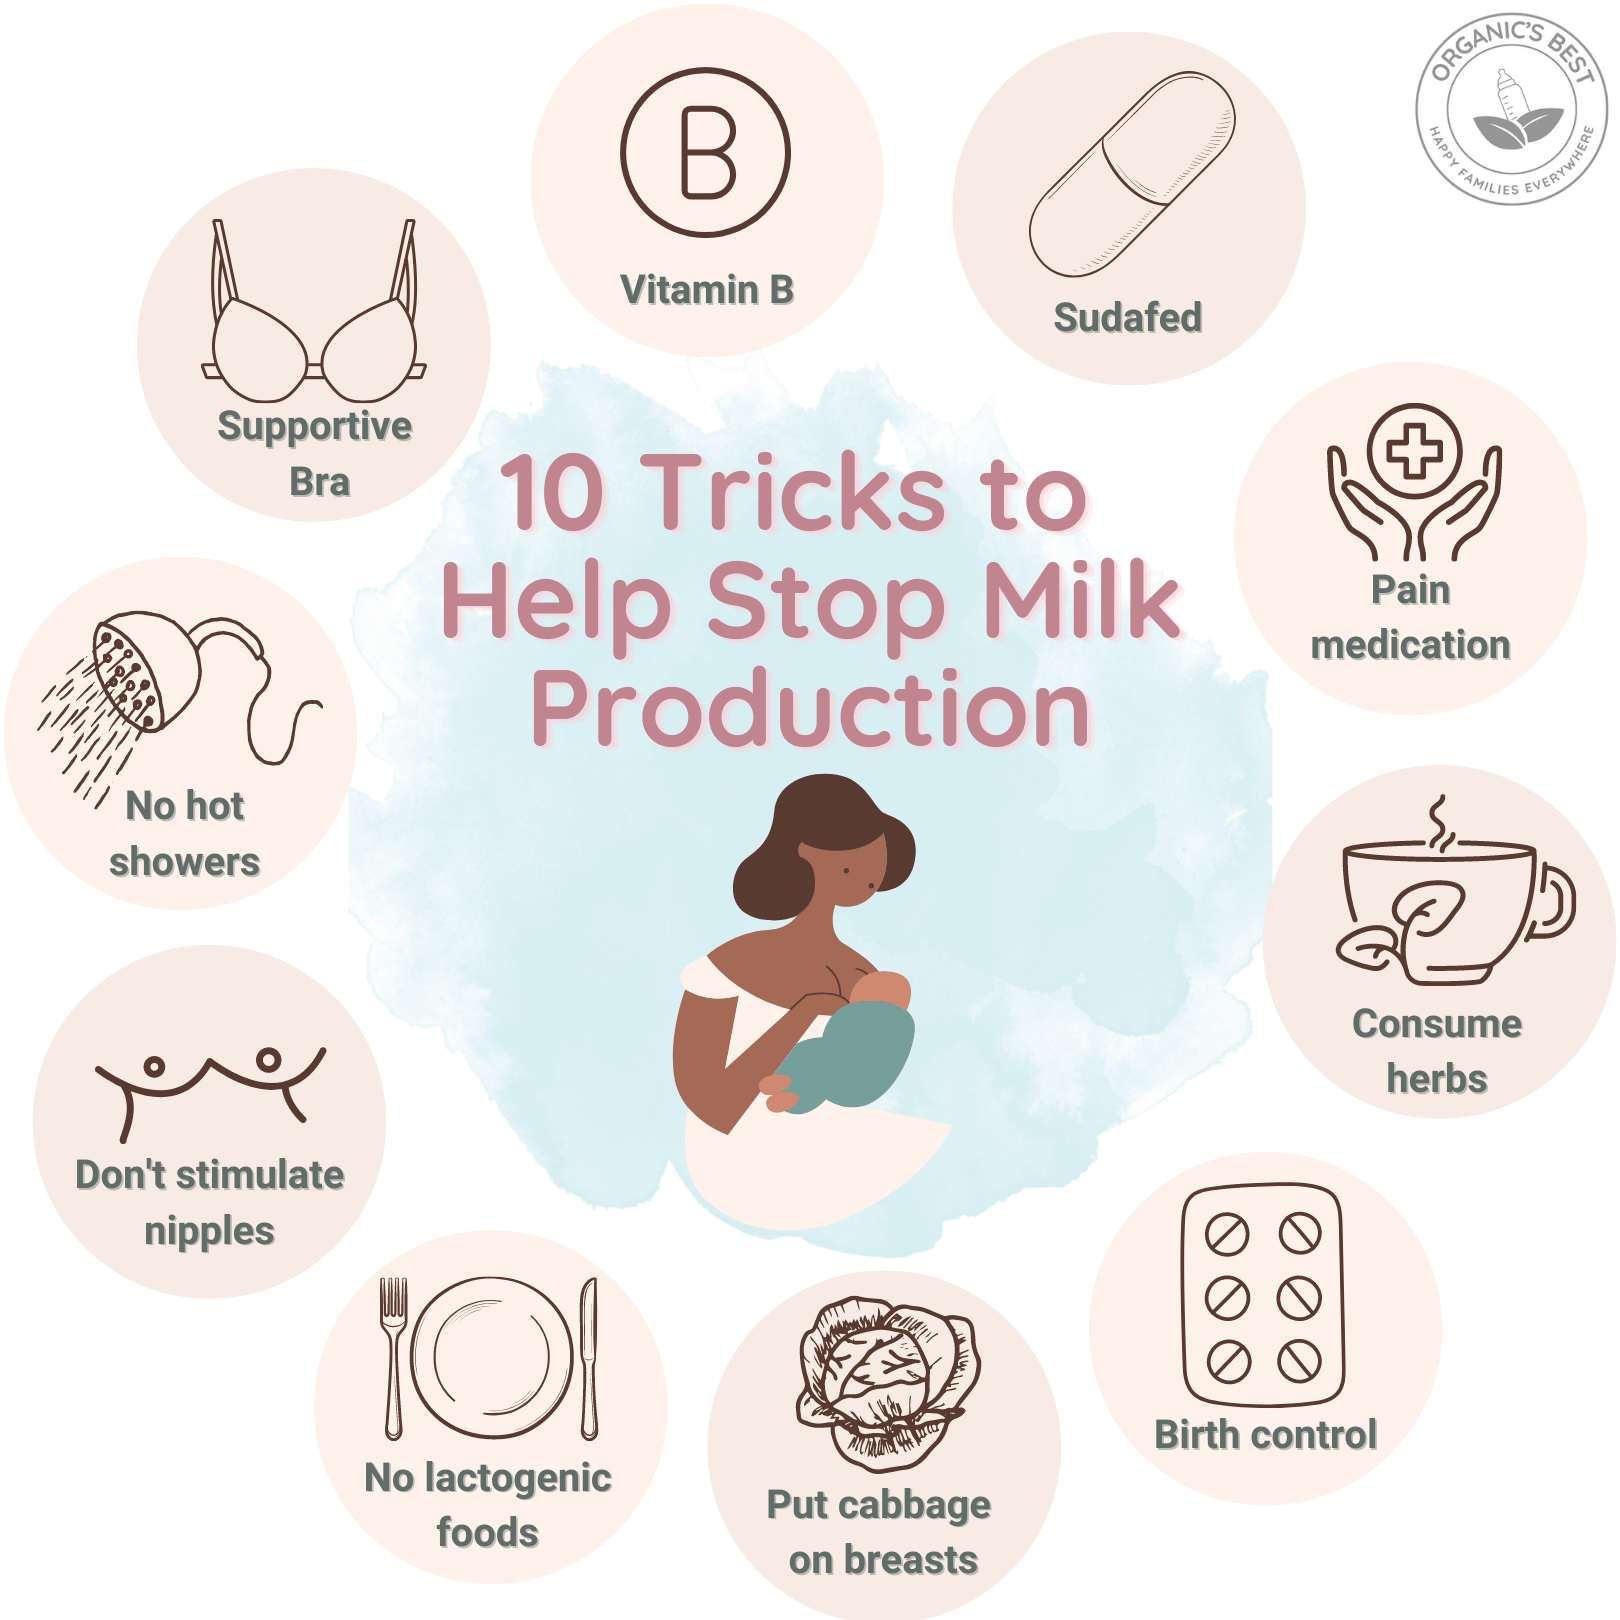 Tips for How to Stop Milk Production if Not Breastfeeding!